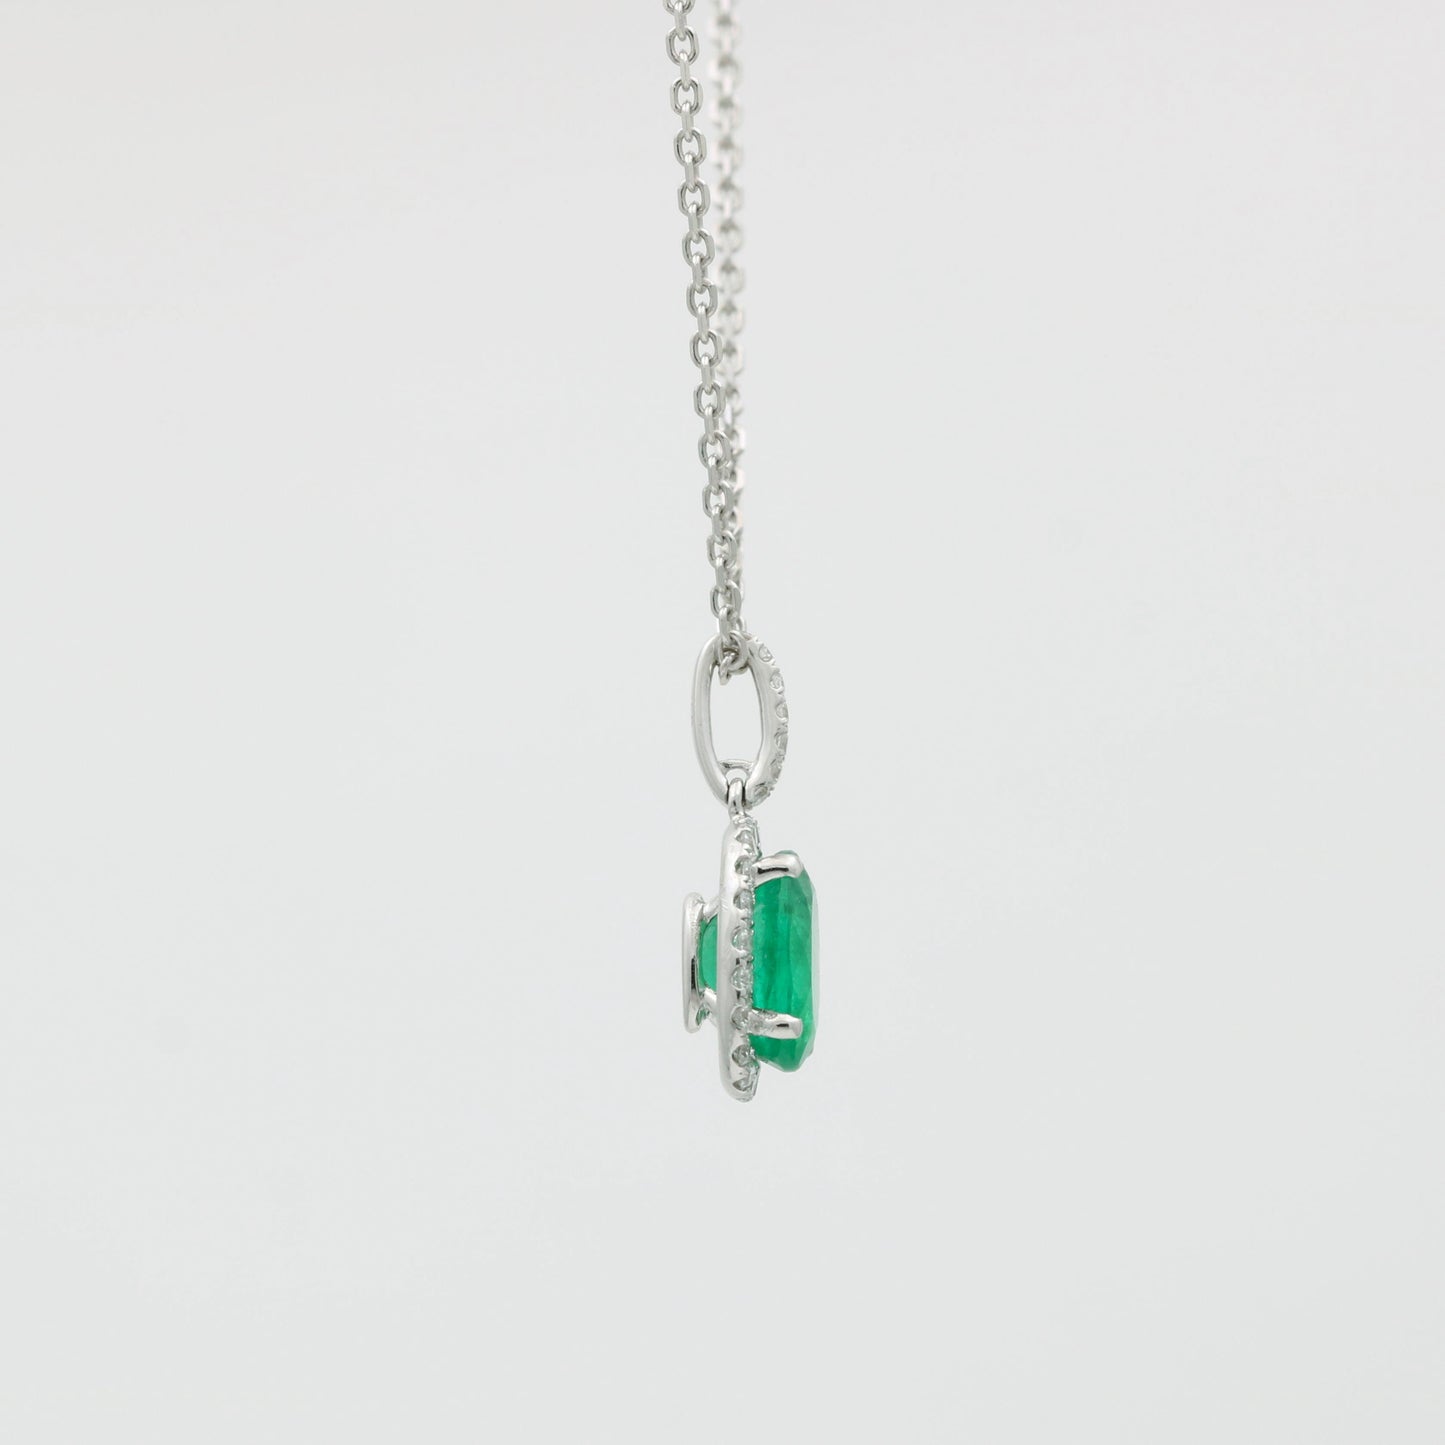 Emerald and Diamond Pendant Necklace in 18k White Gold - 31 Jewels Inc.